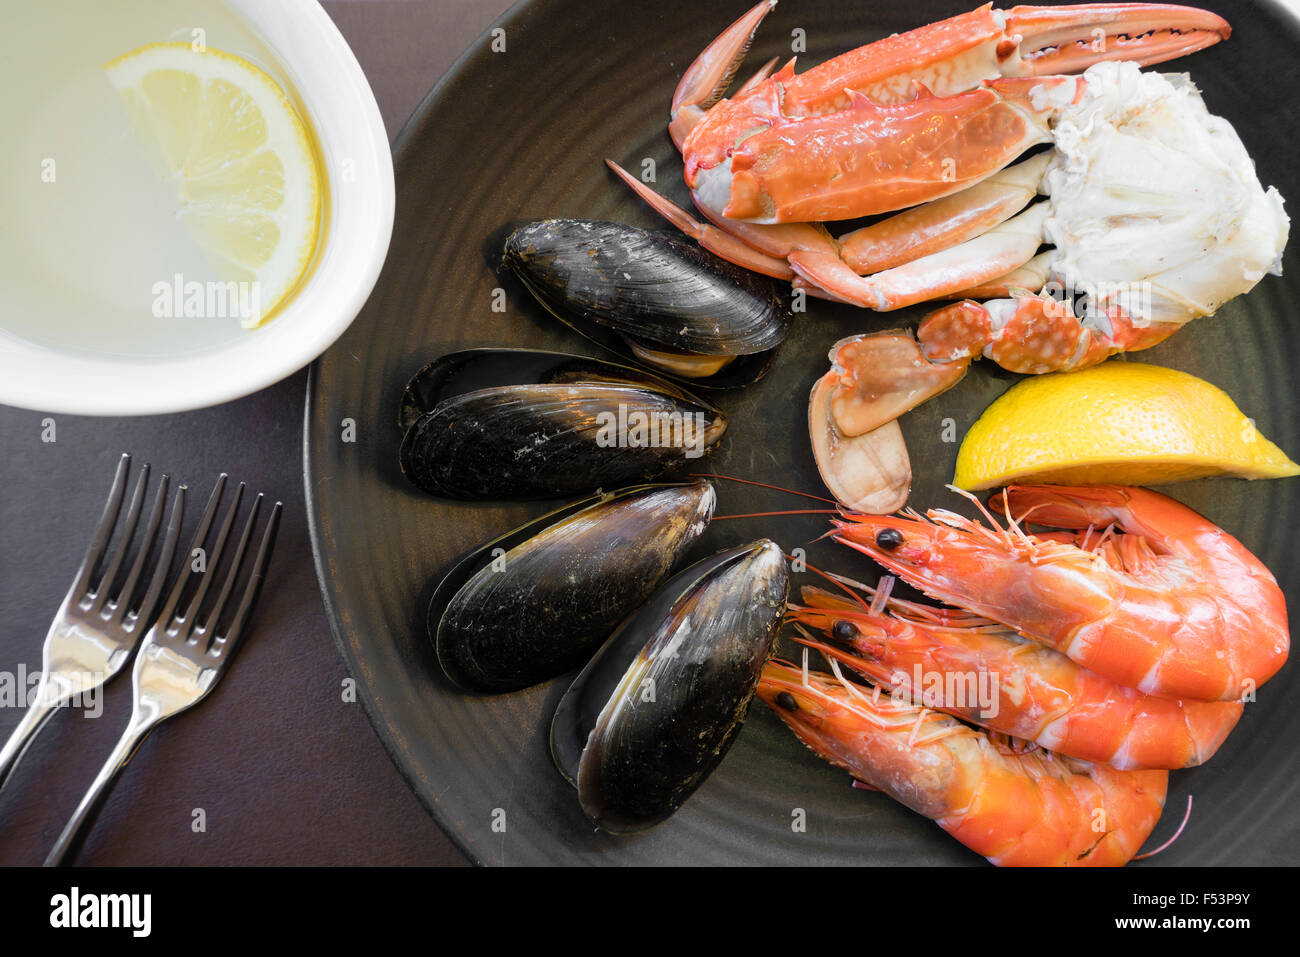 Top down view of seafood on plate and finger bowl Stock Photo